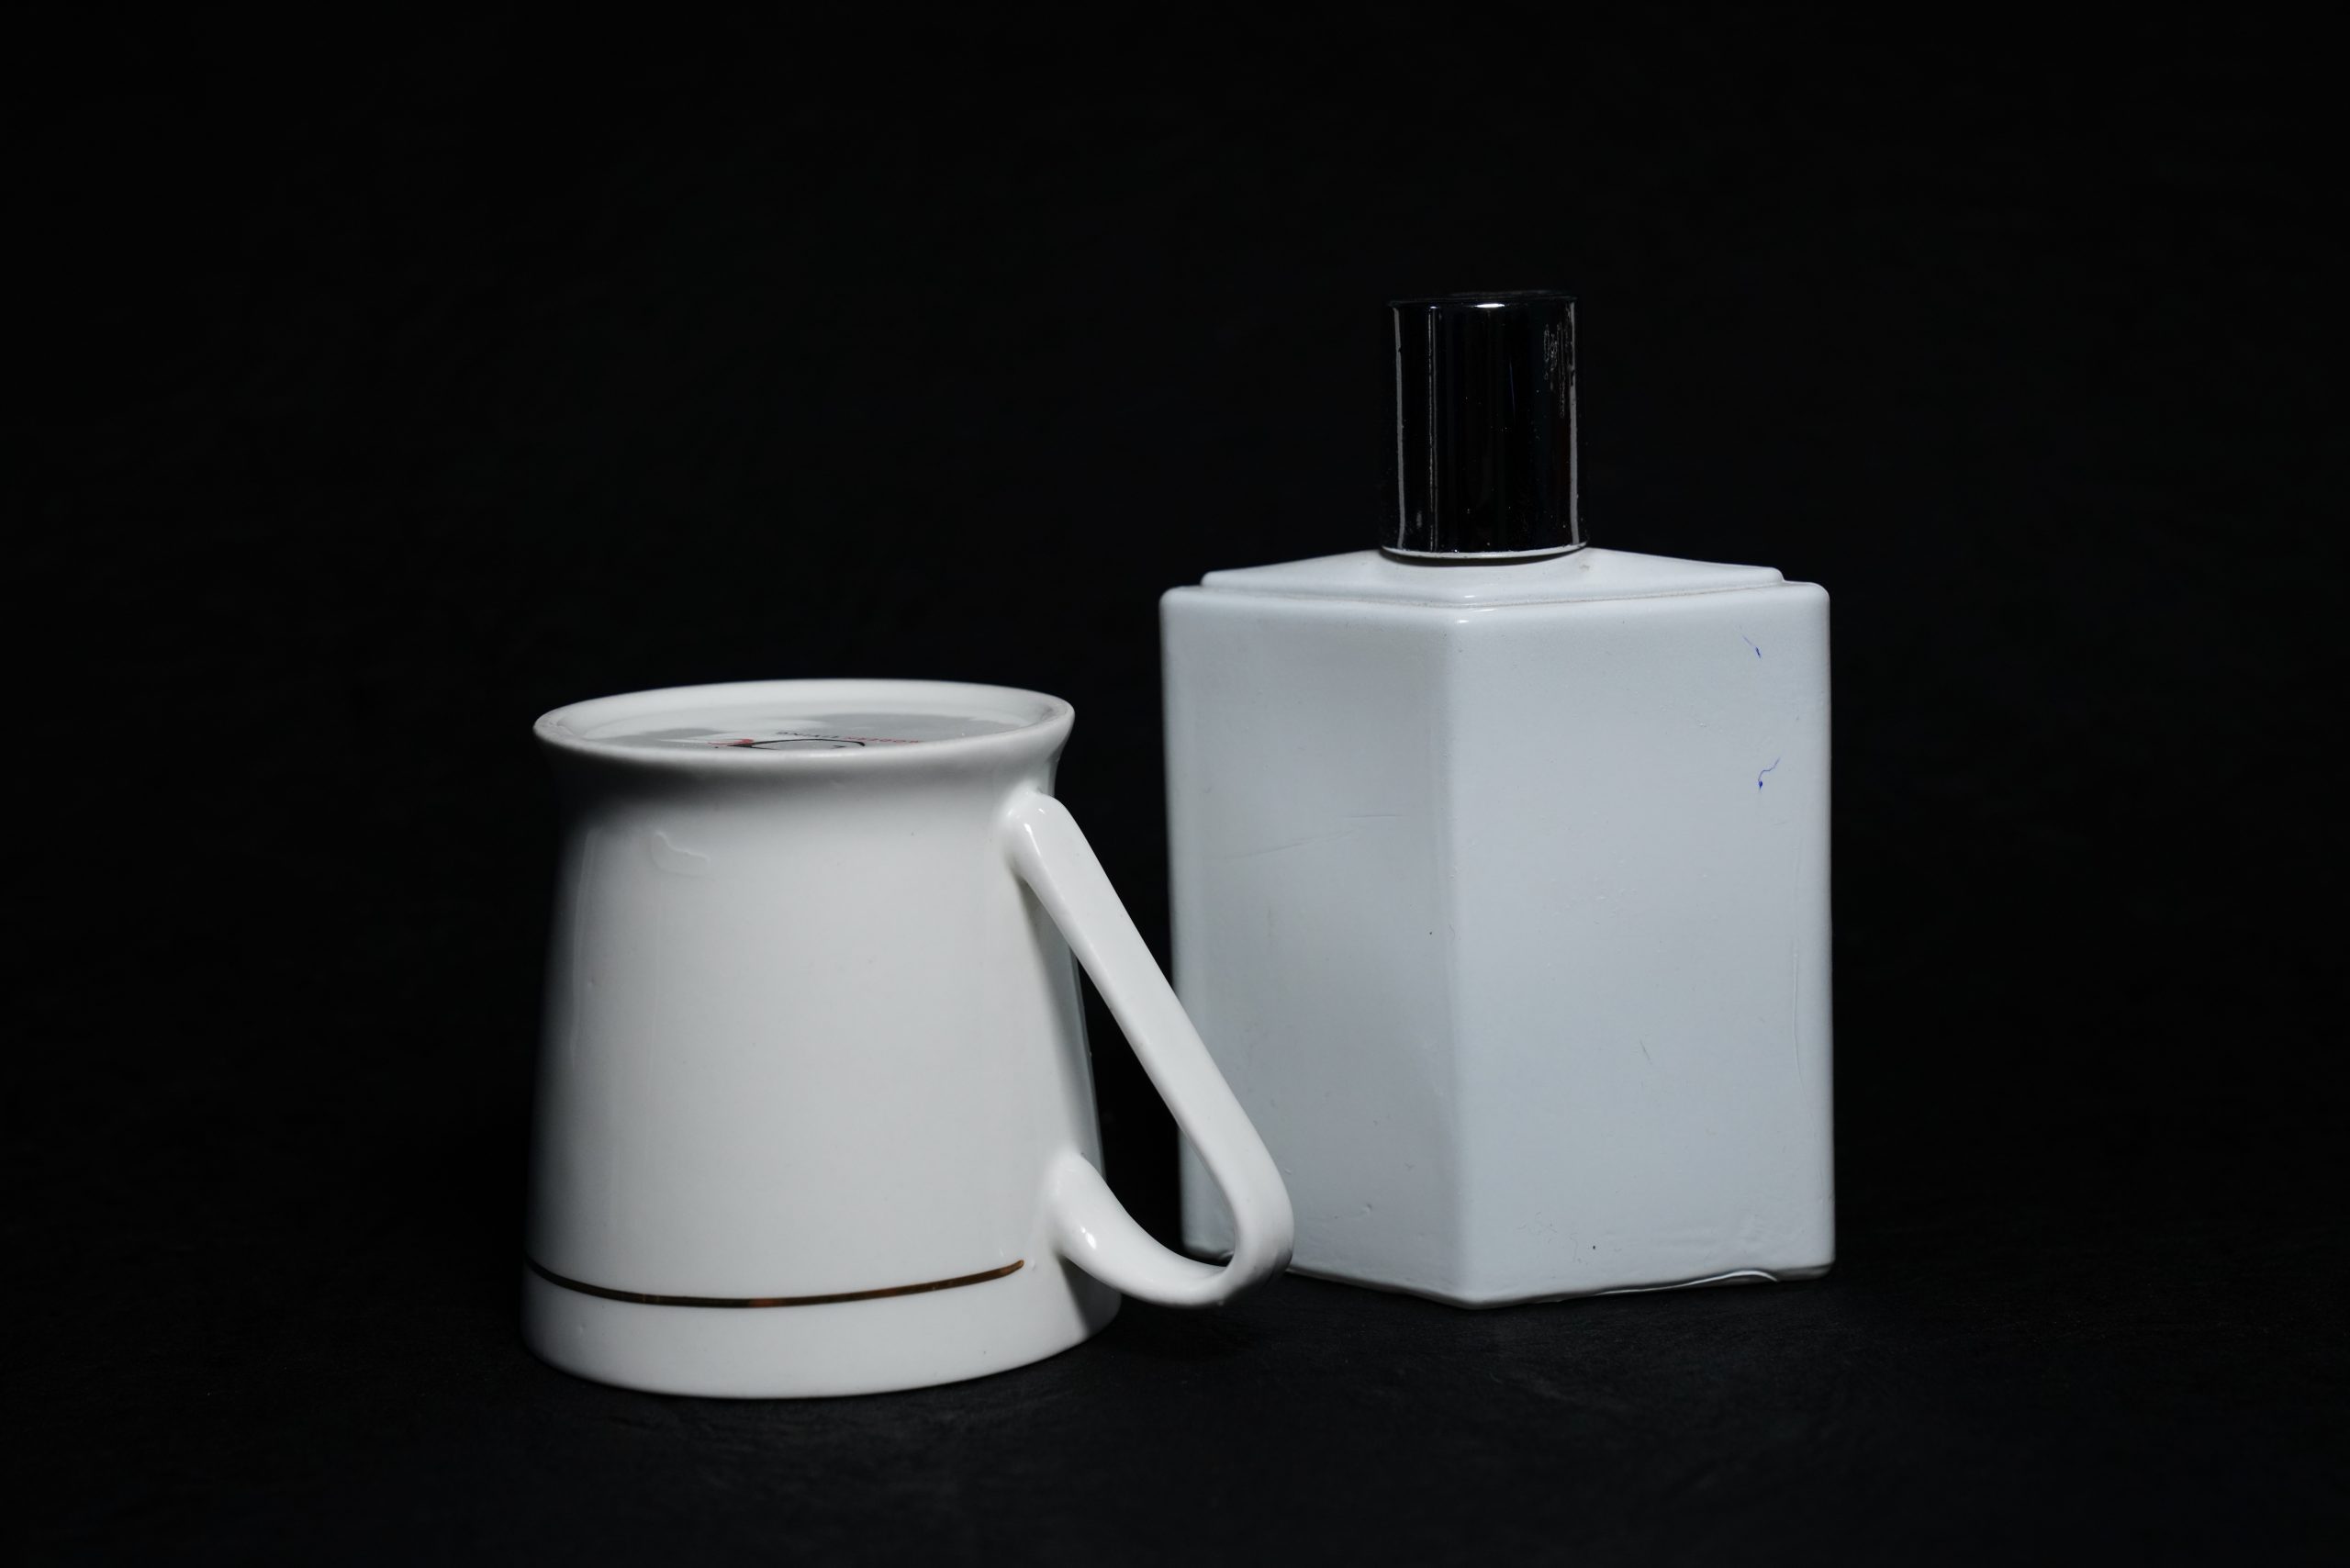 A tea cup and perfume bottle